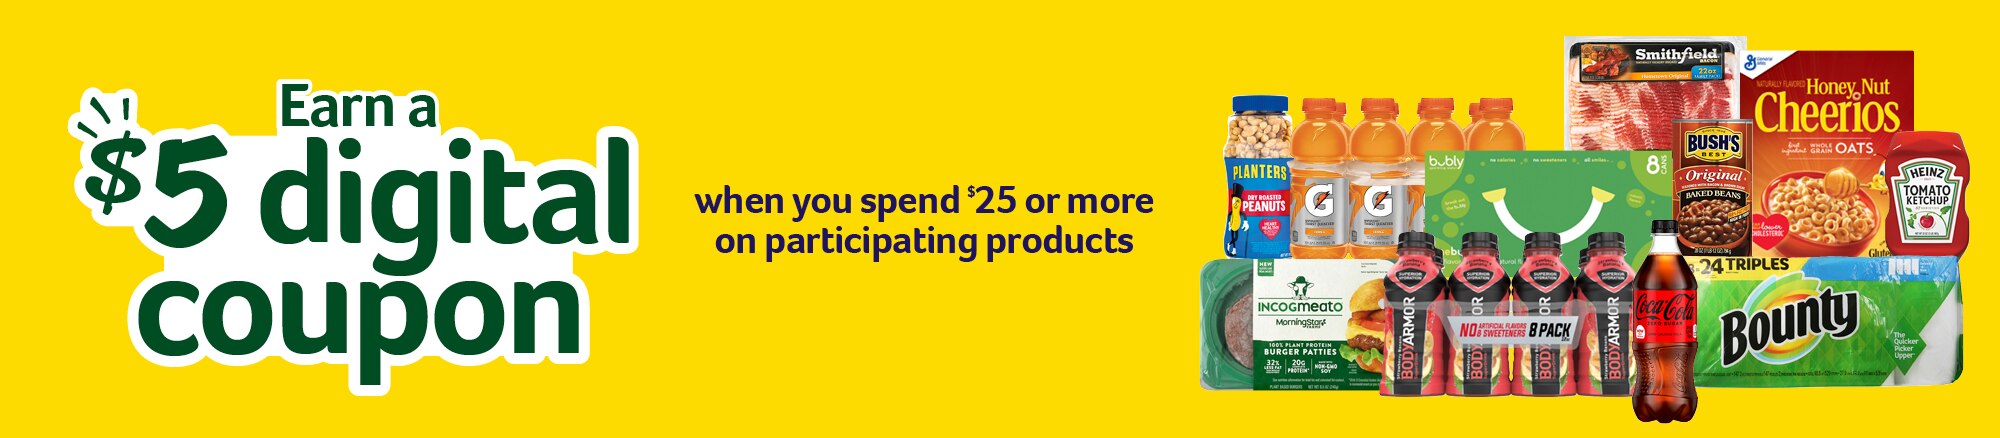 Earn a $5 digital coupon when you spend $25 or more on participating products